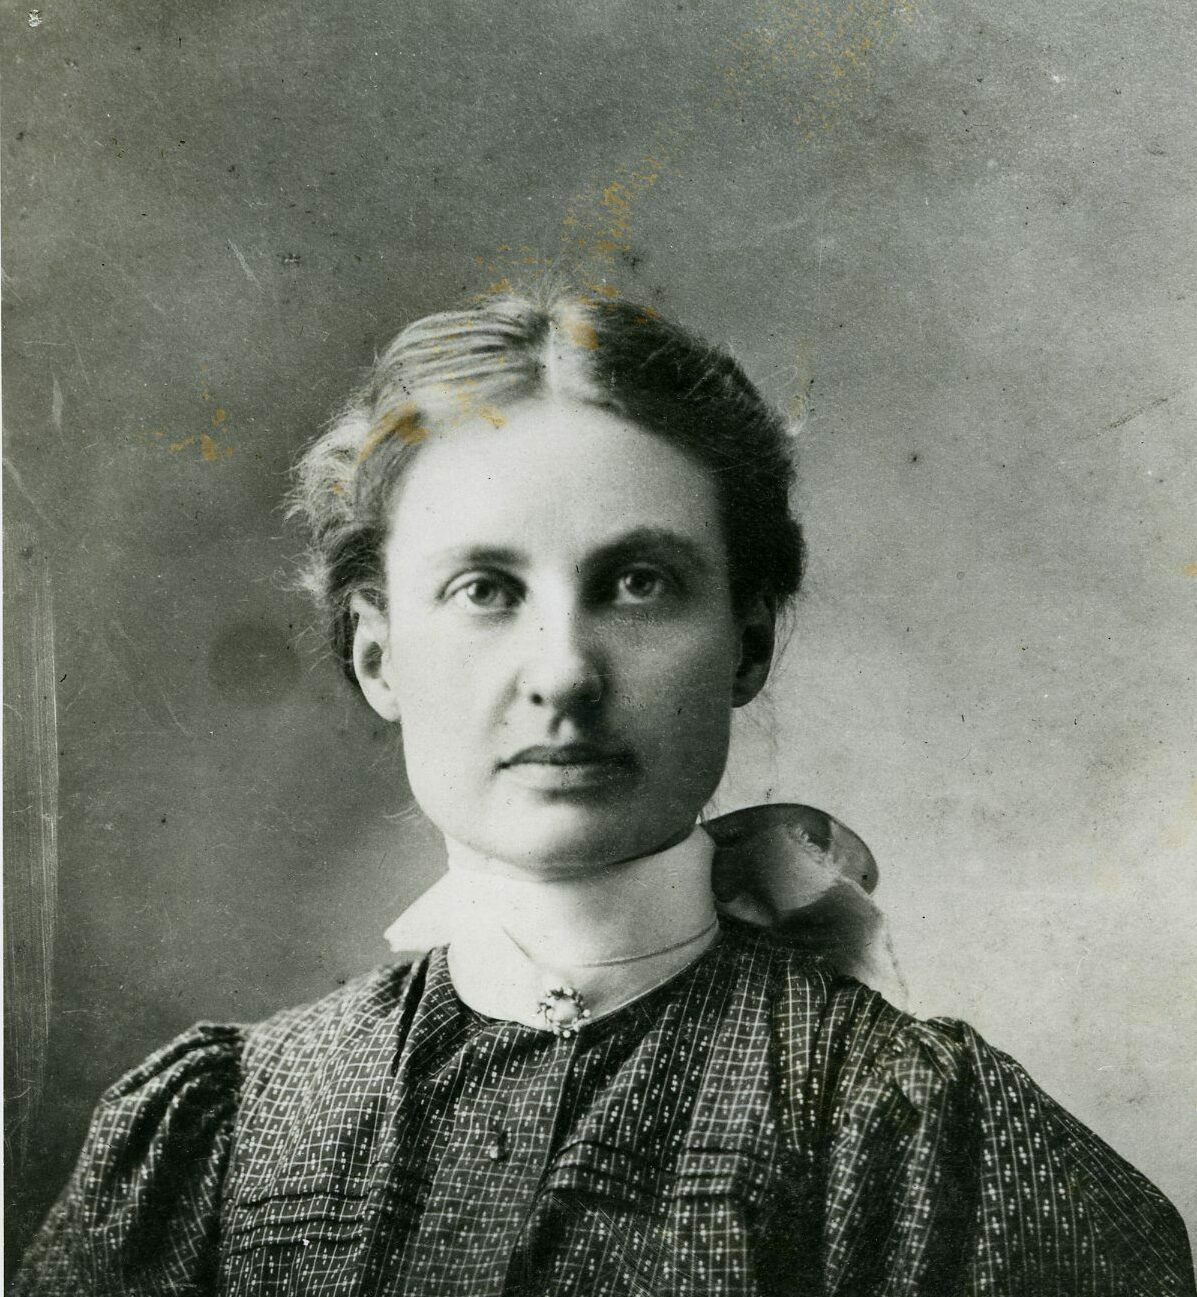 Florence Sawyer poses in black and white photo in 1898.